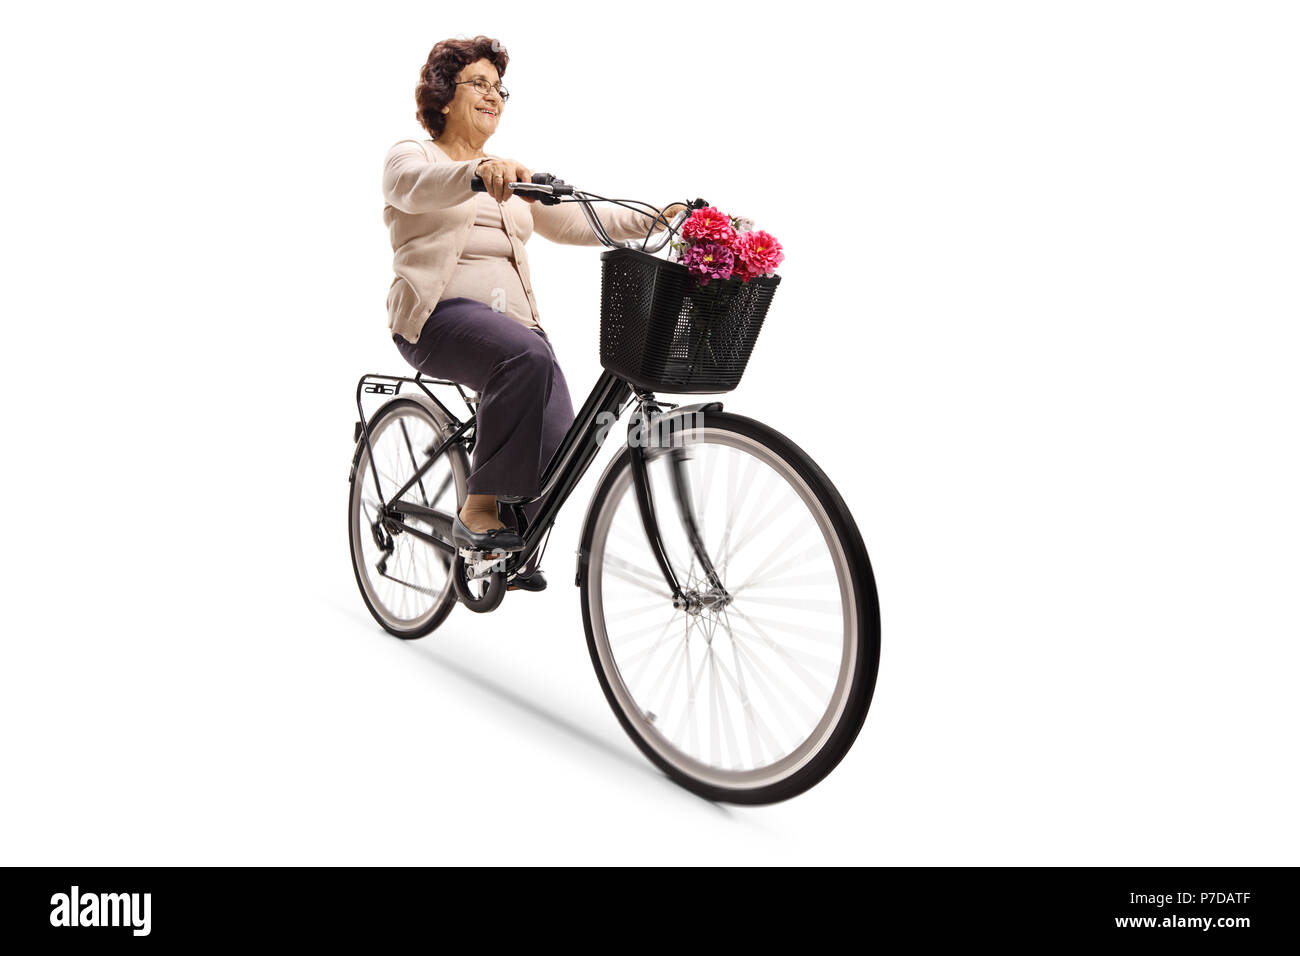 Elderly woman riding a bicycle isolated on white background Stock Photo